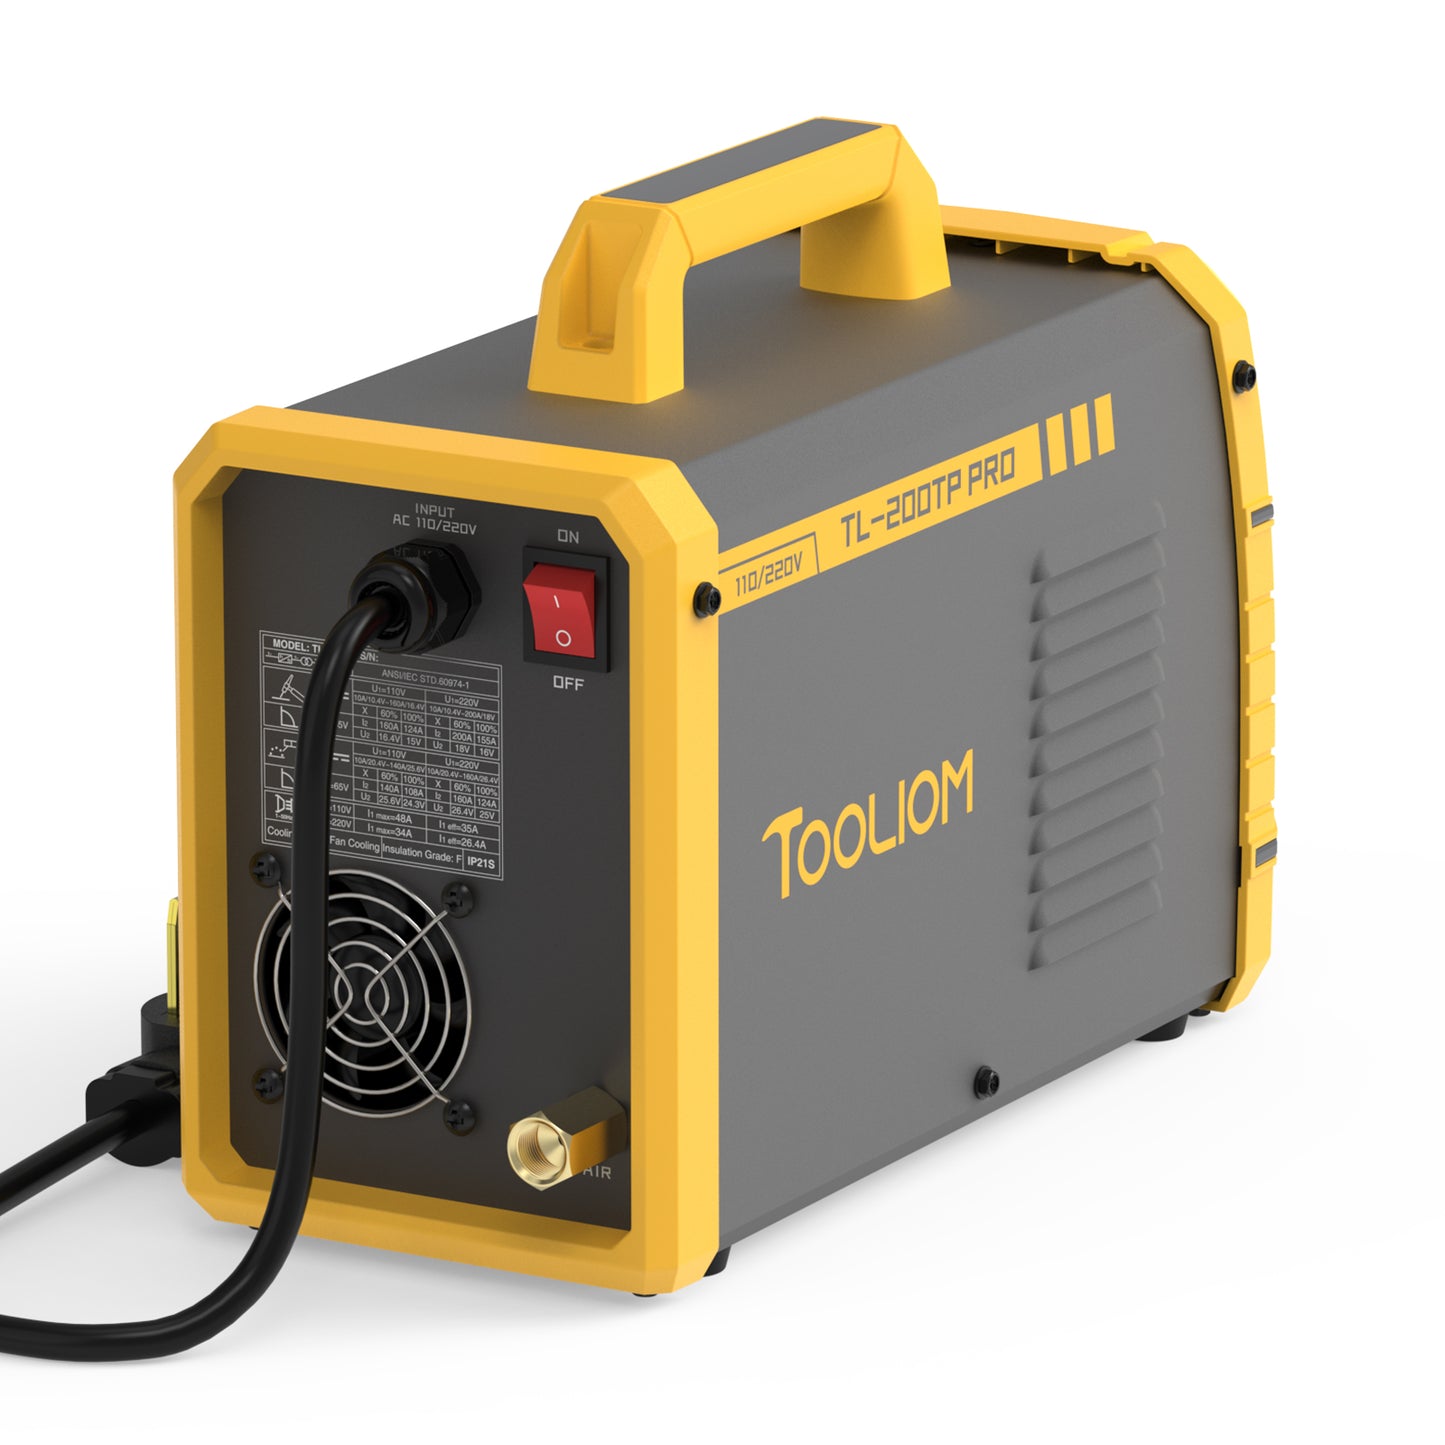 High Frequency Dual Voltage TL-200T Welder